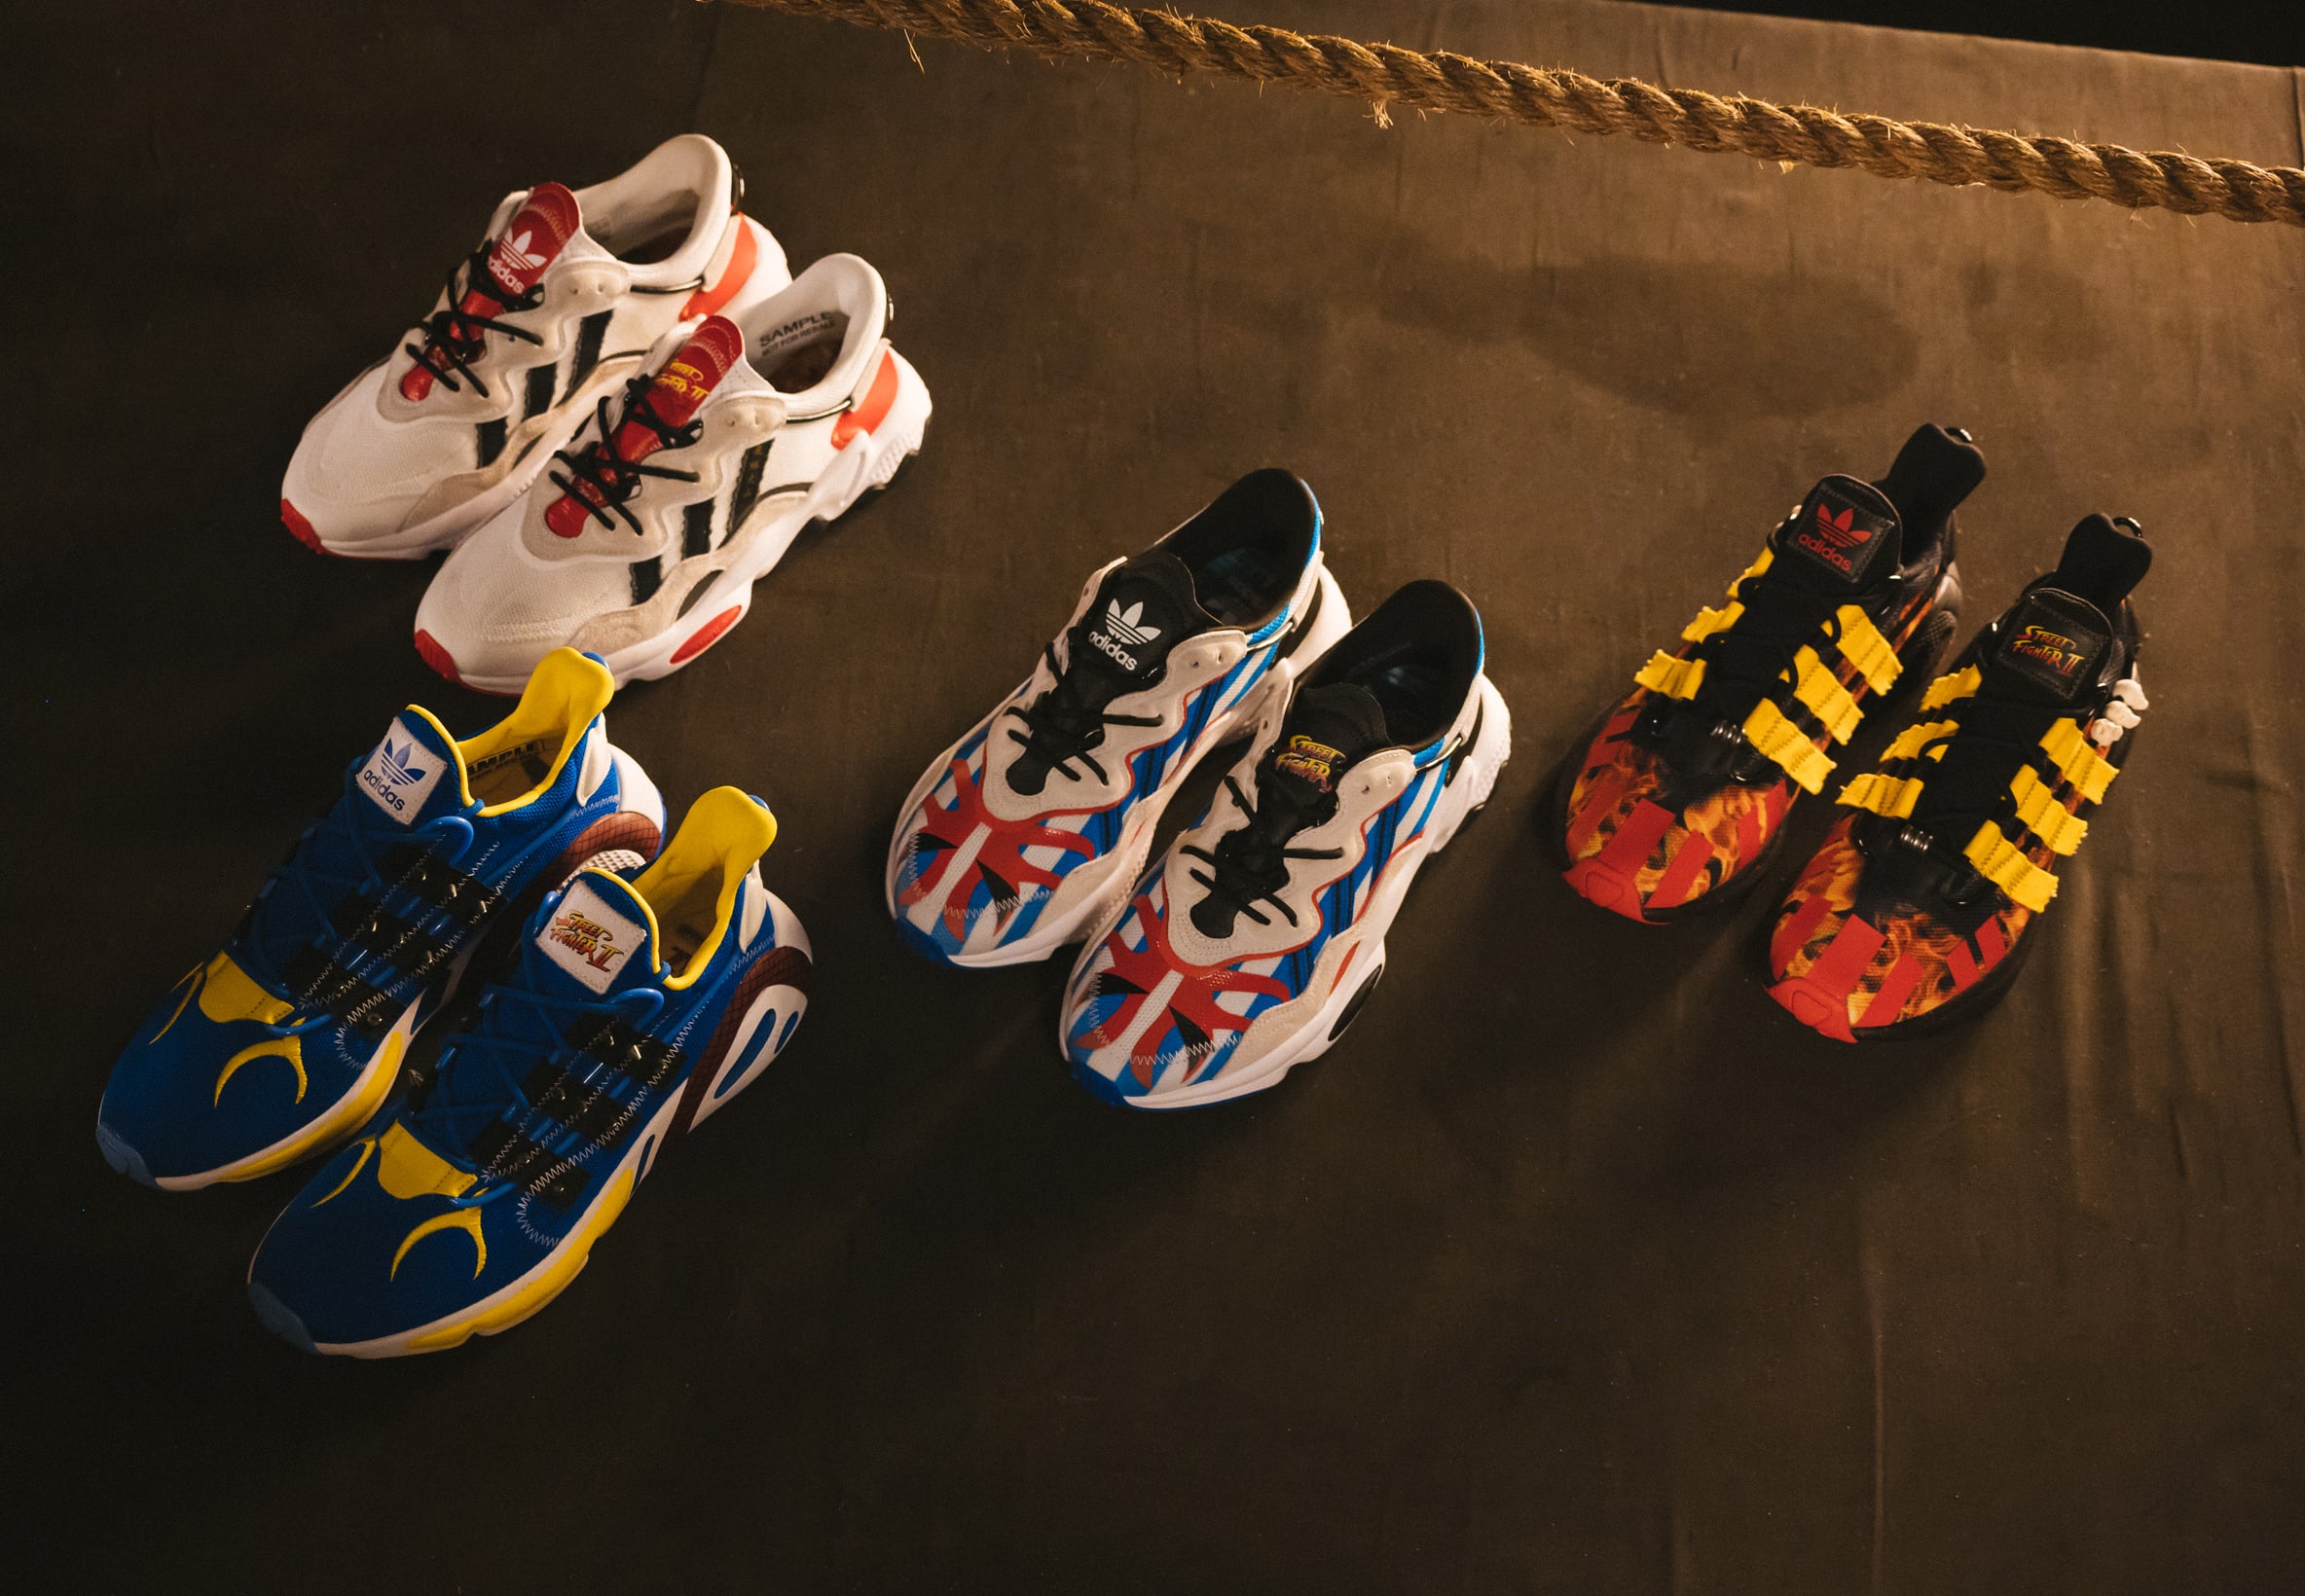 Street Fighter Characters Inspire New Bait x Adidas Collab